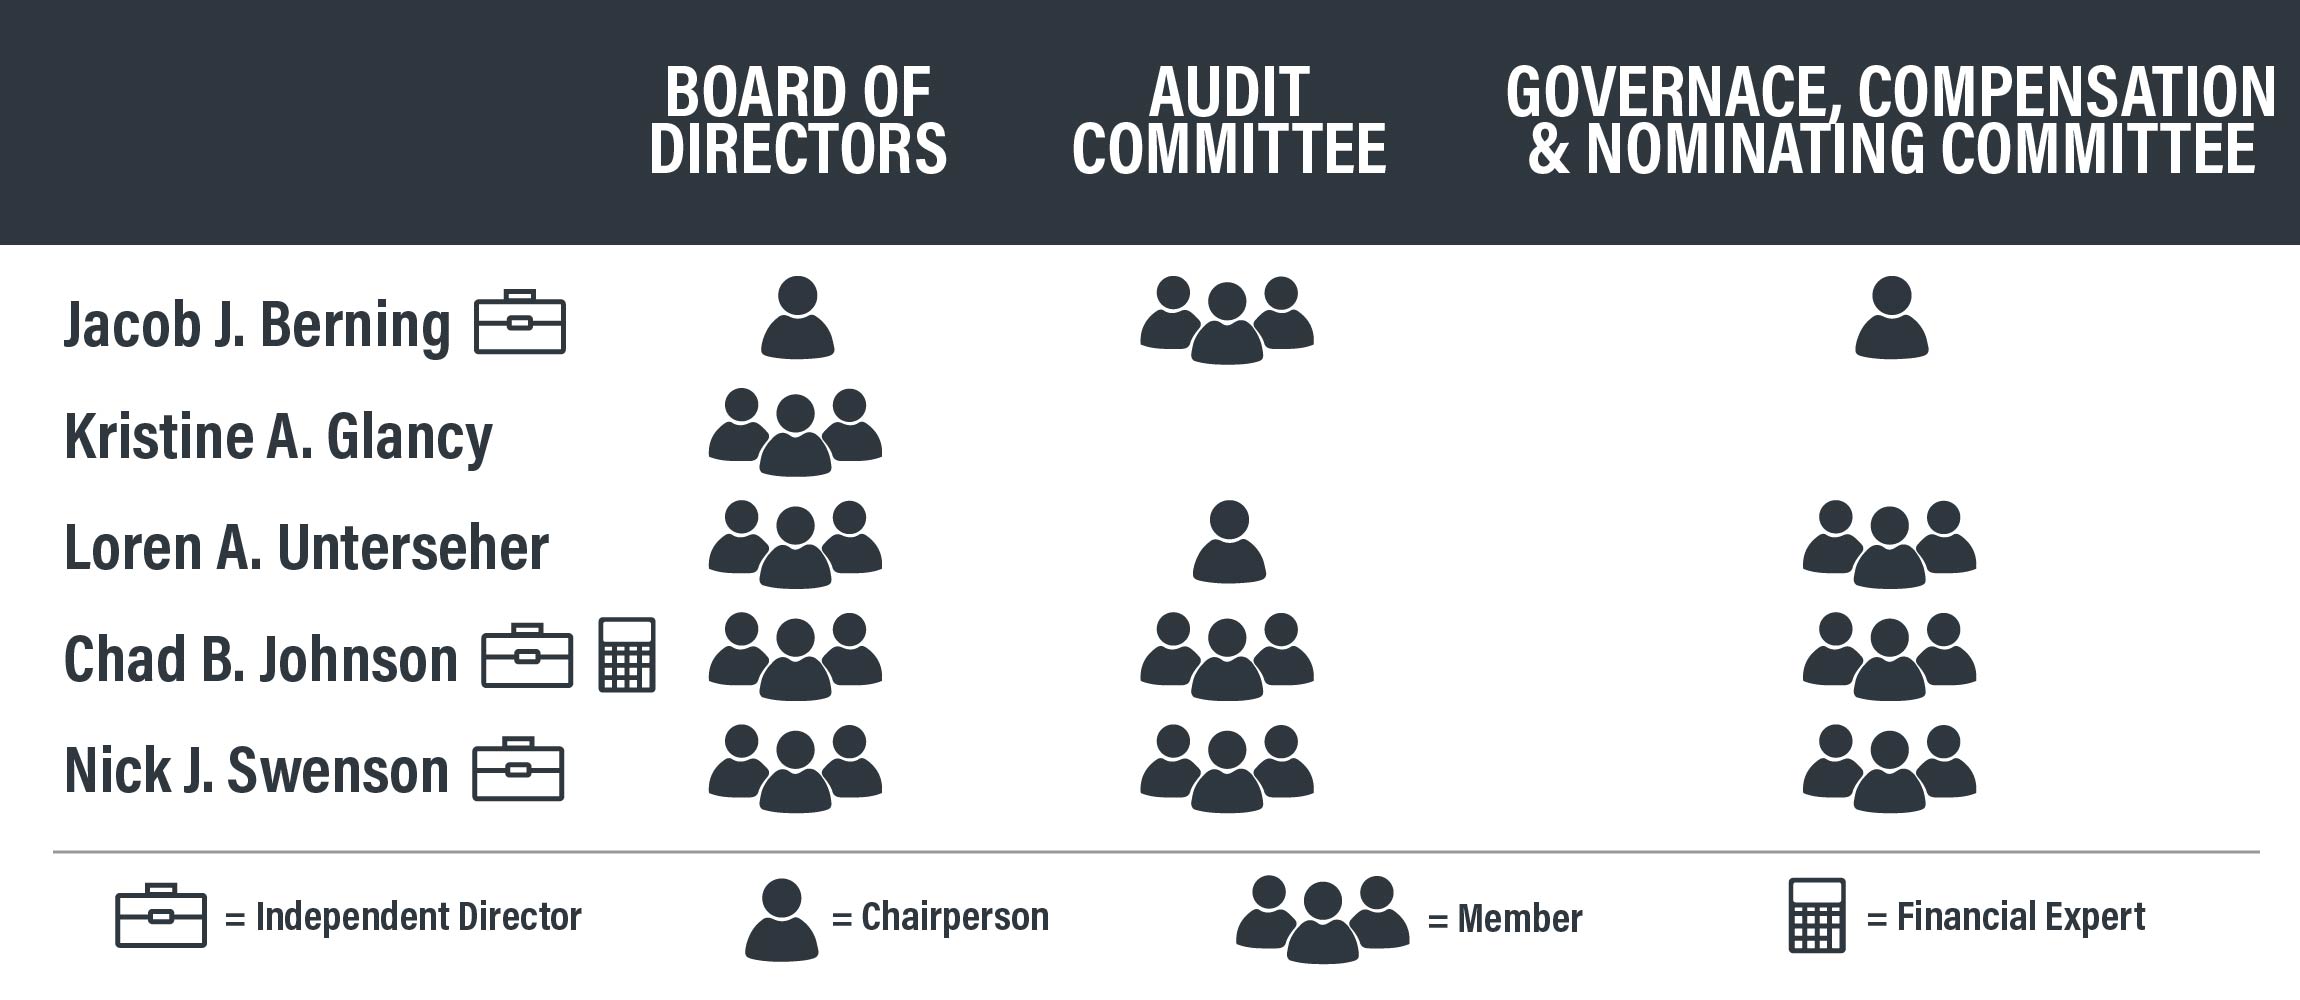 Board of Directors, Audit Committee, and Governance Committee